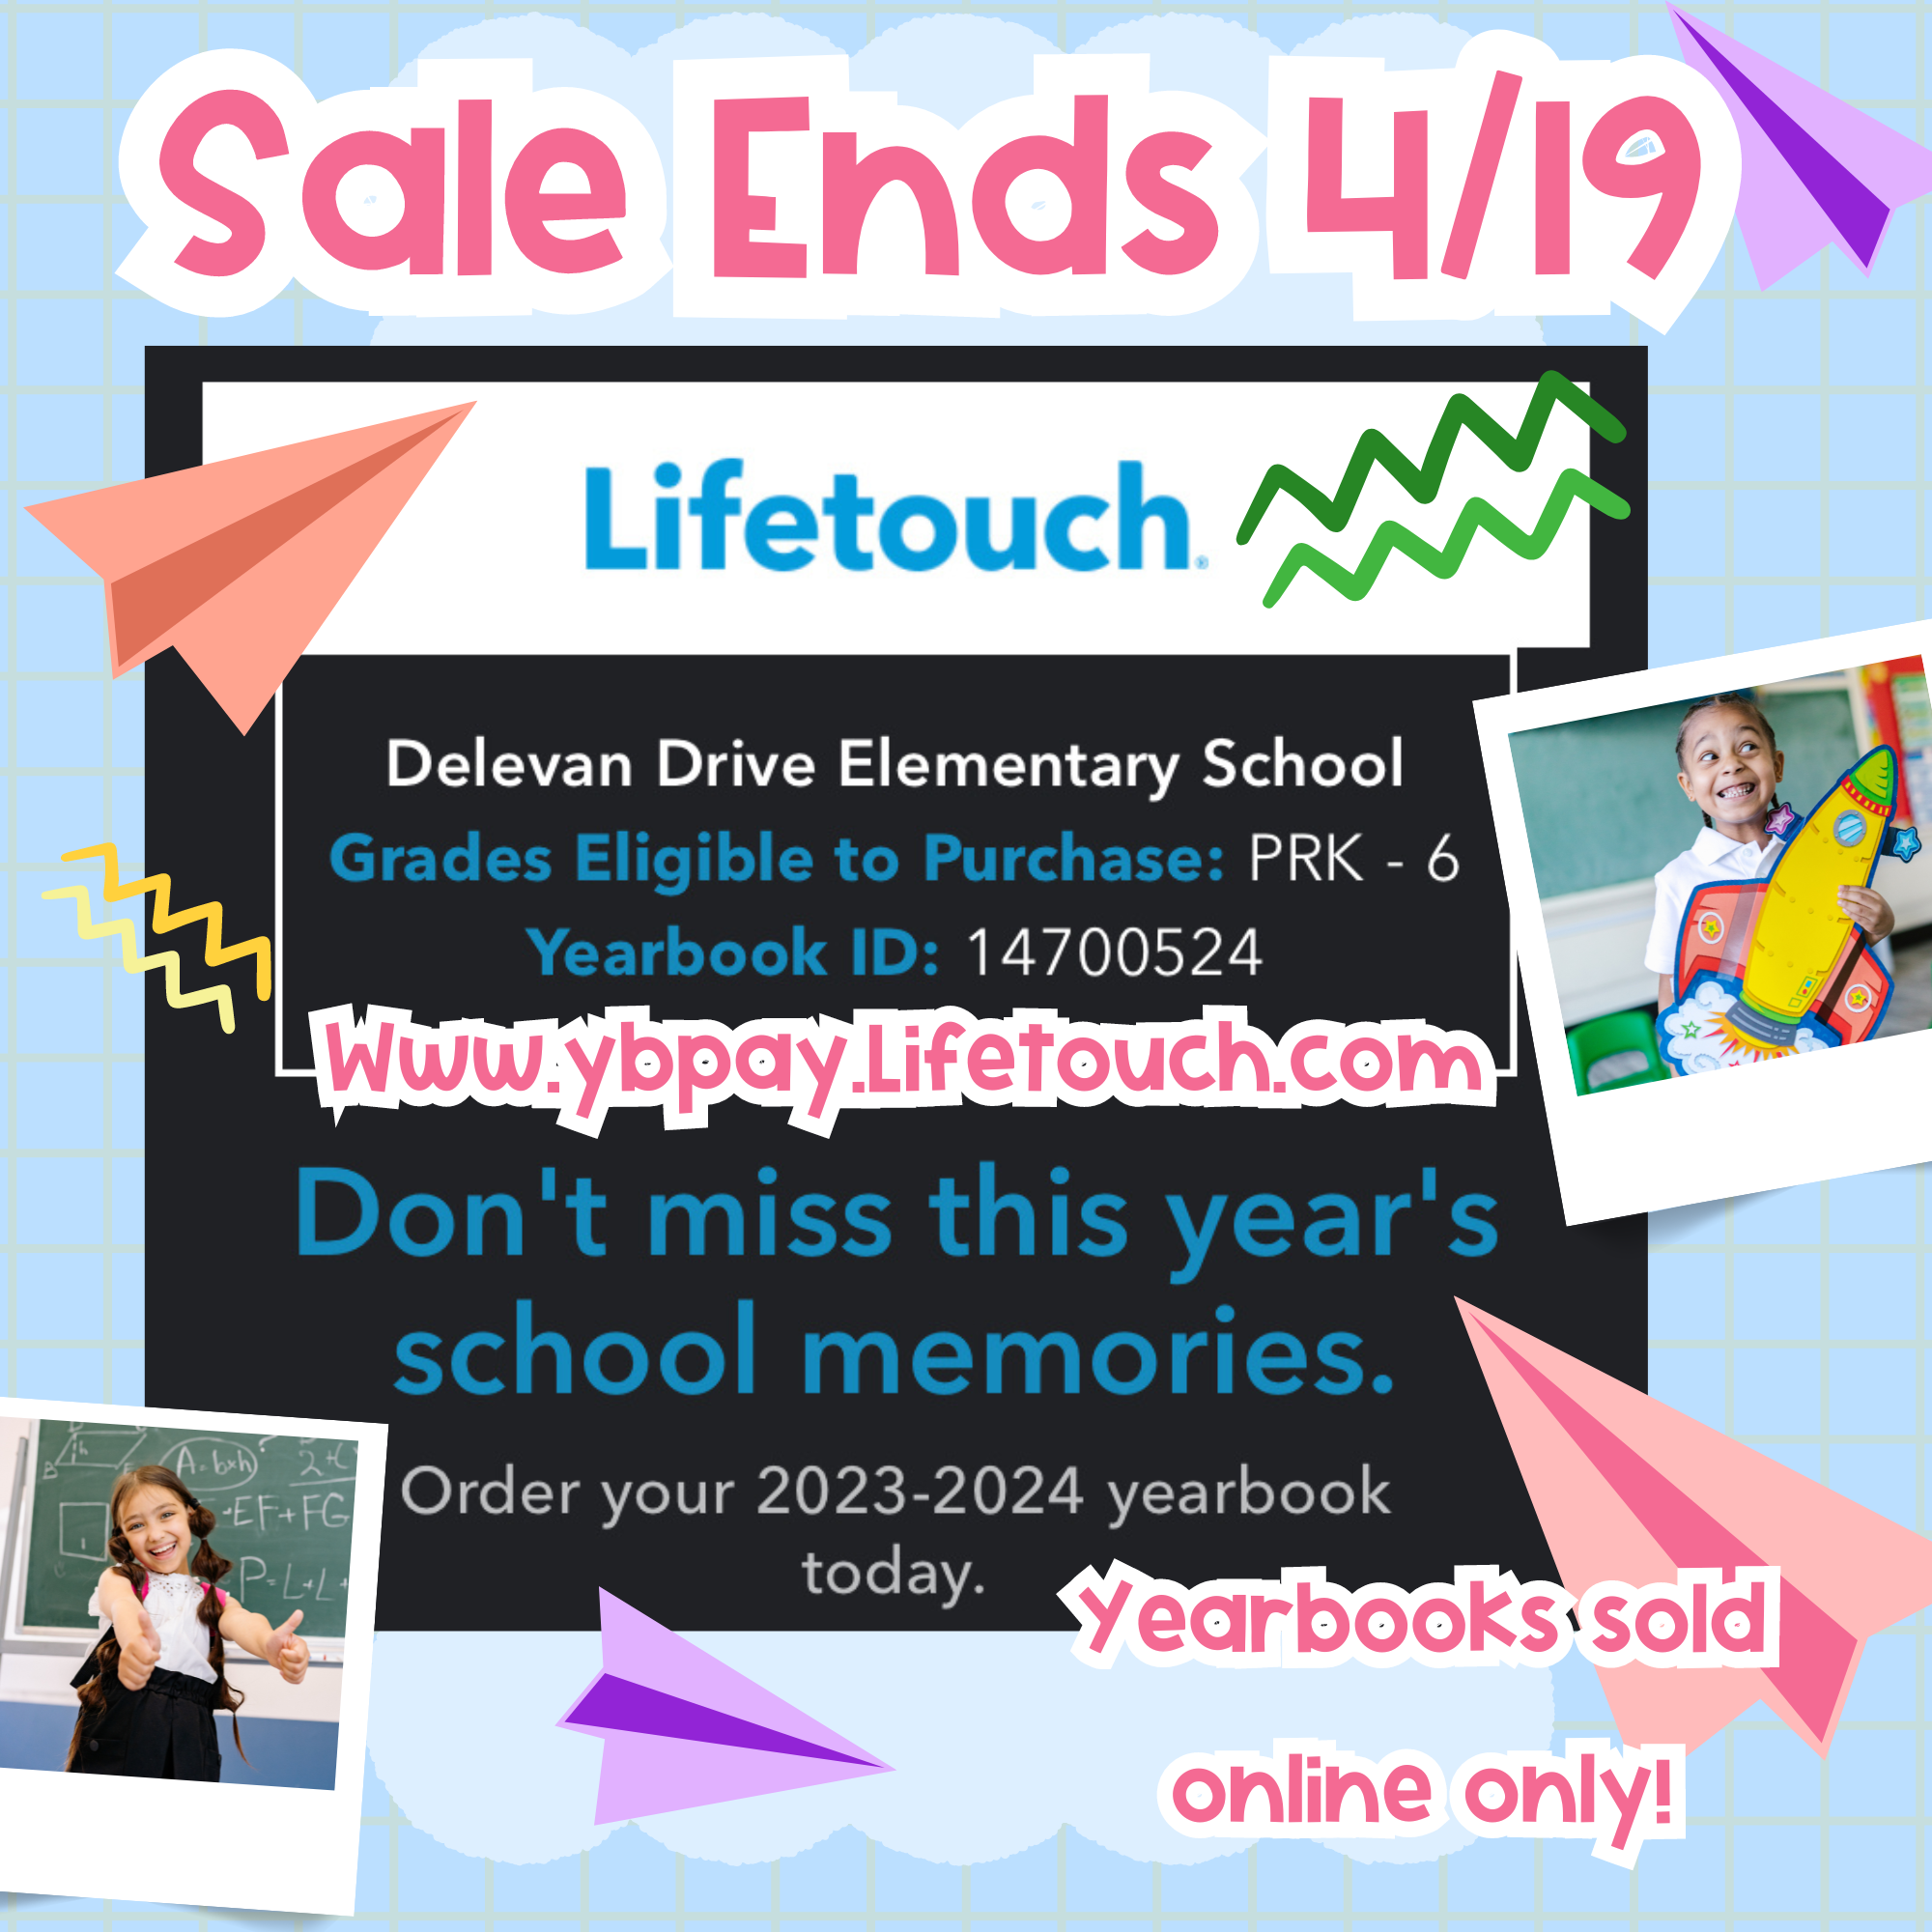 Lifetouch Yearbook.png